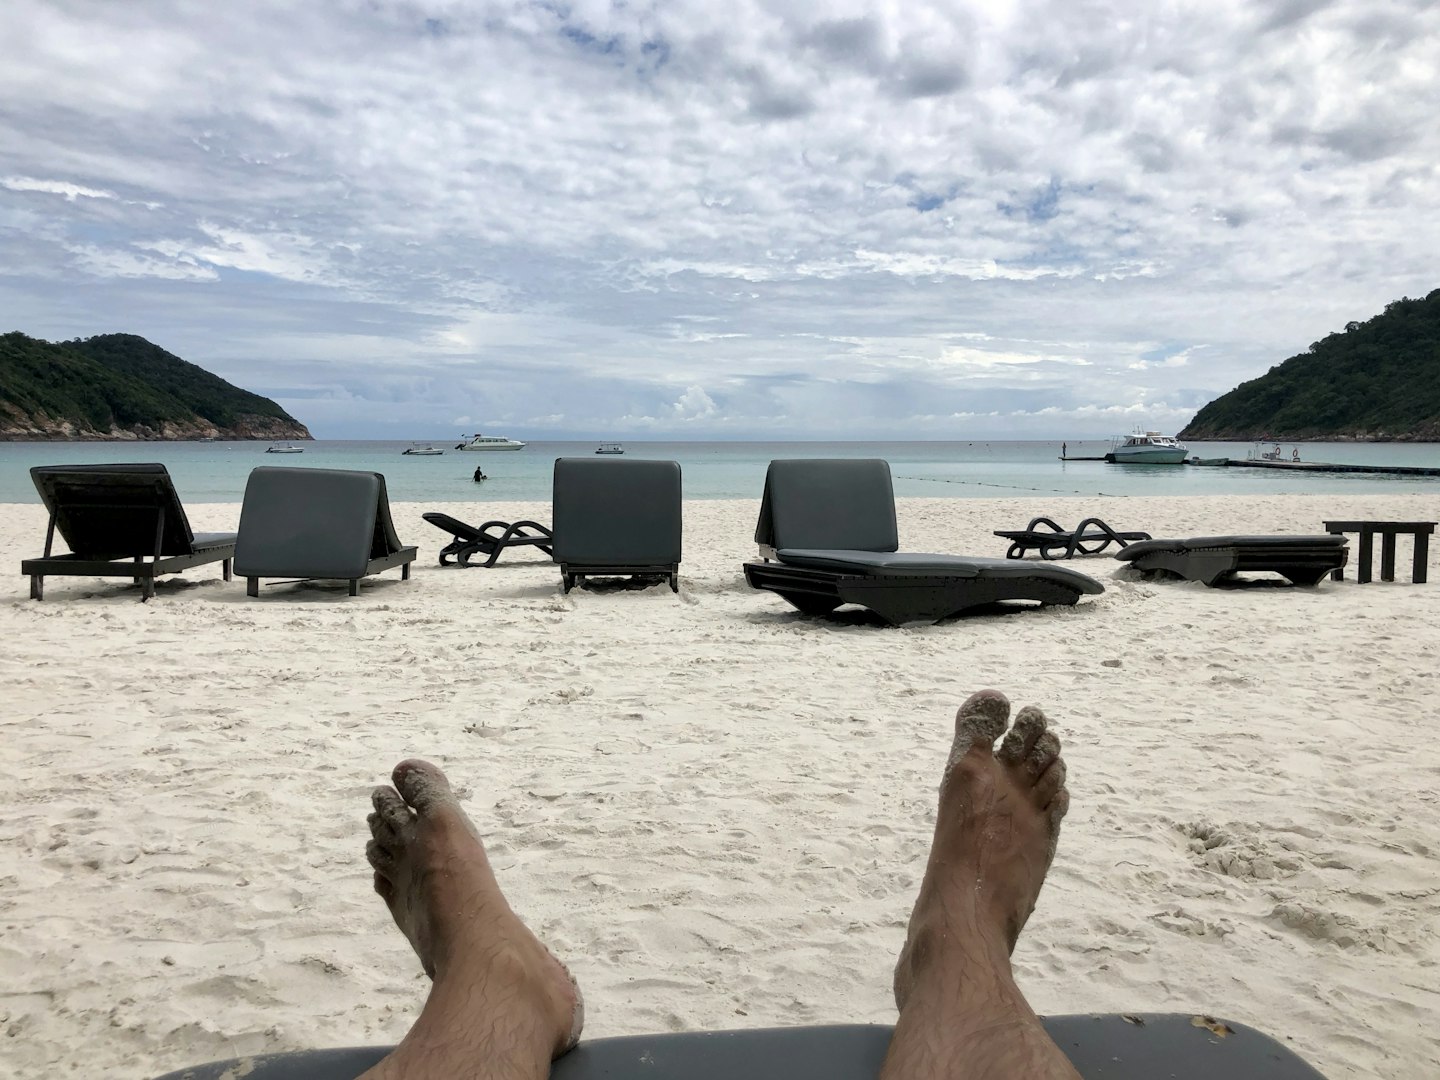 feet on a sunbet with a view of the ovean and white sand, cloudy